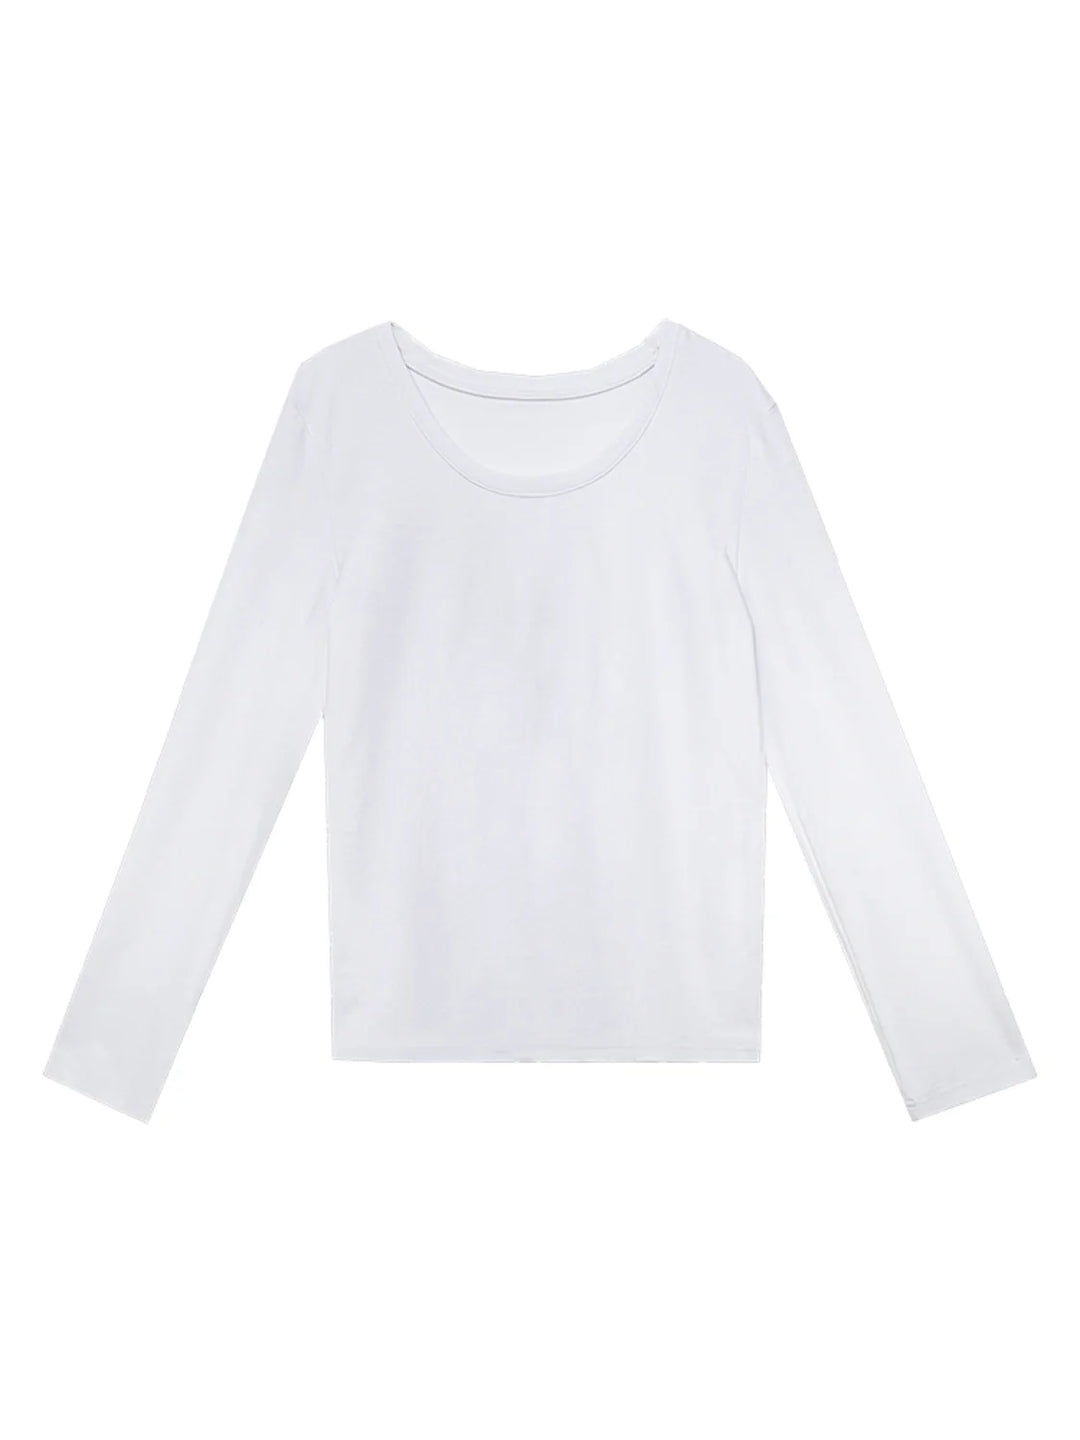 Long Sleeve Round Neck White Tee for Everyday Comfort